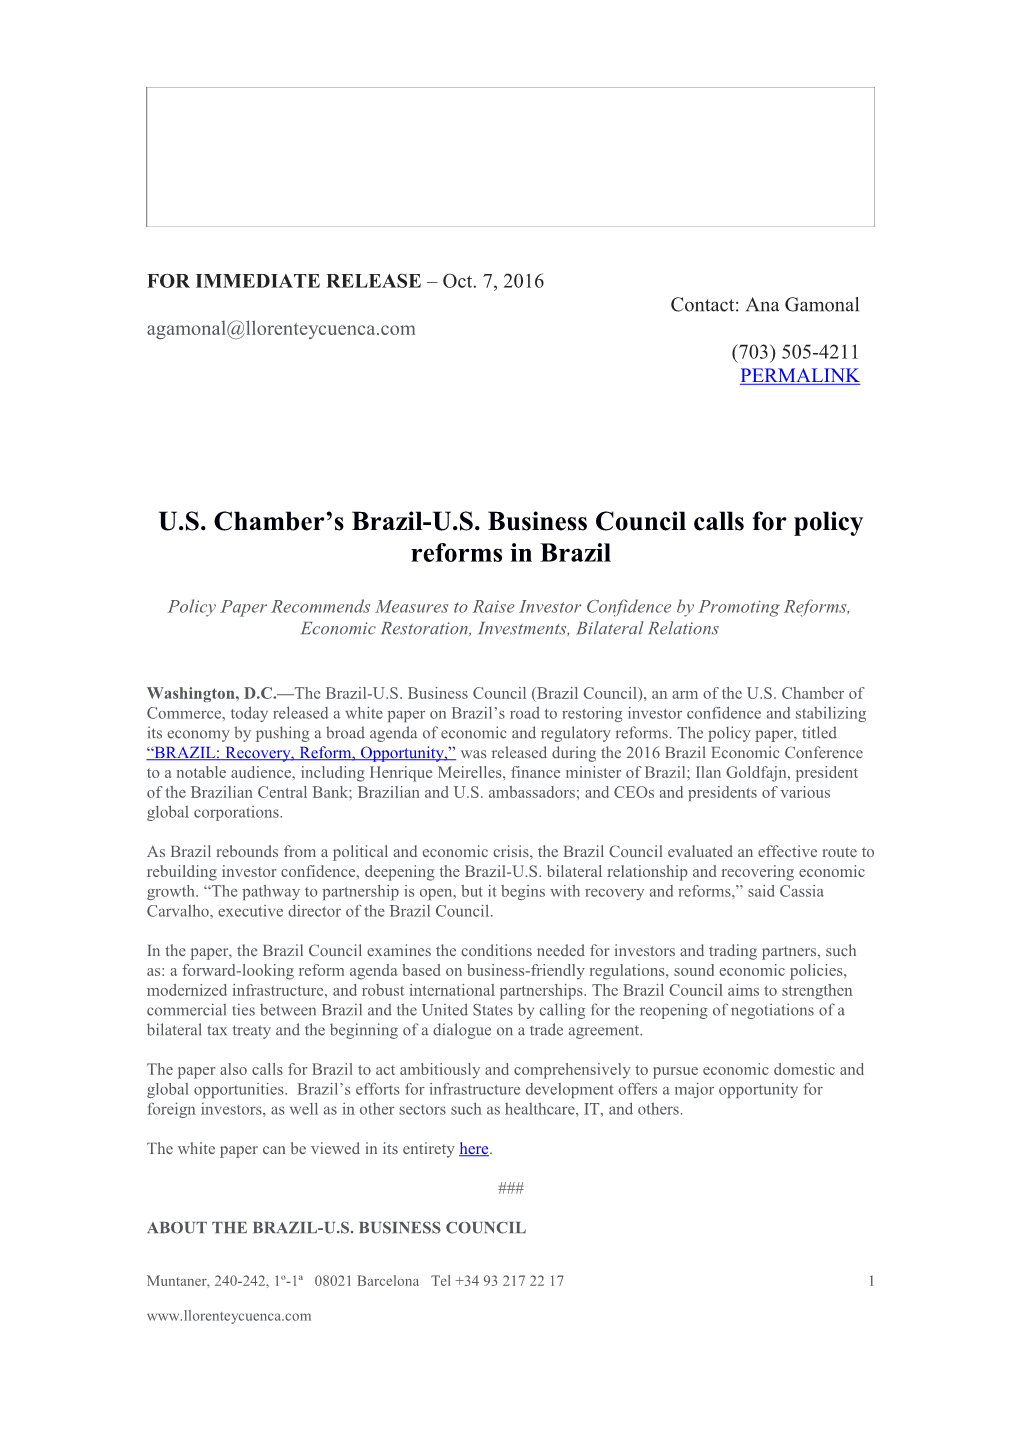 U.S. Chamber S Brazil-U.S. Business Council Calls for Policy Reforms in Brazil